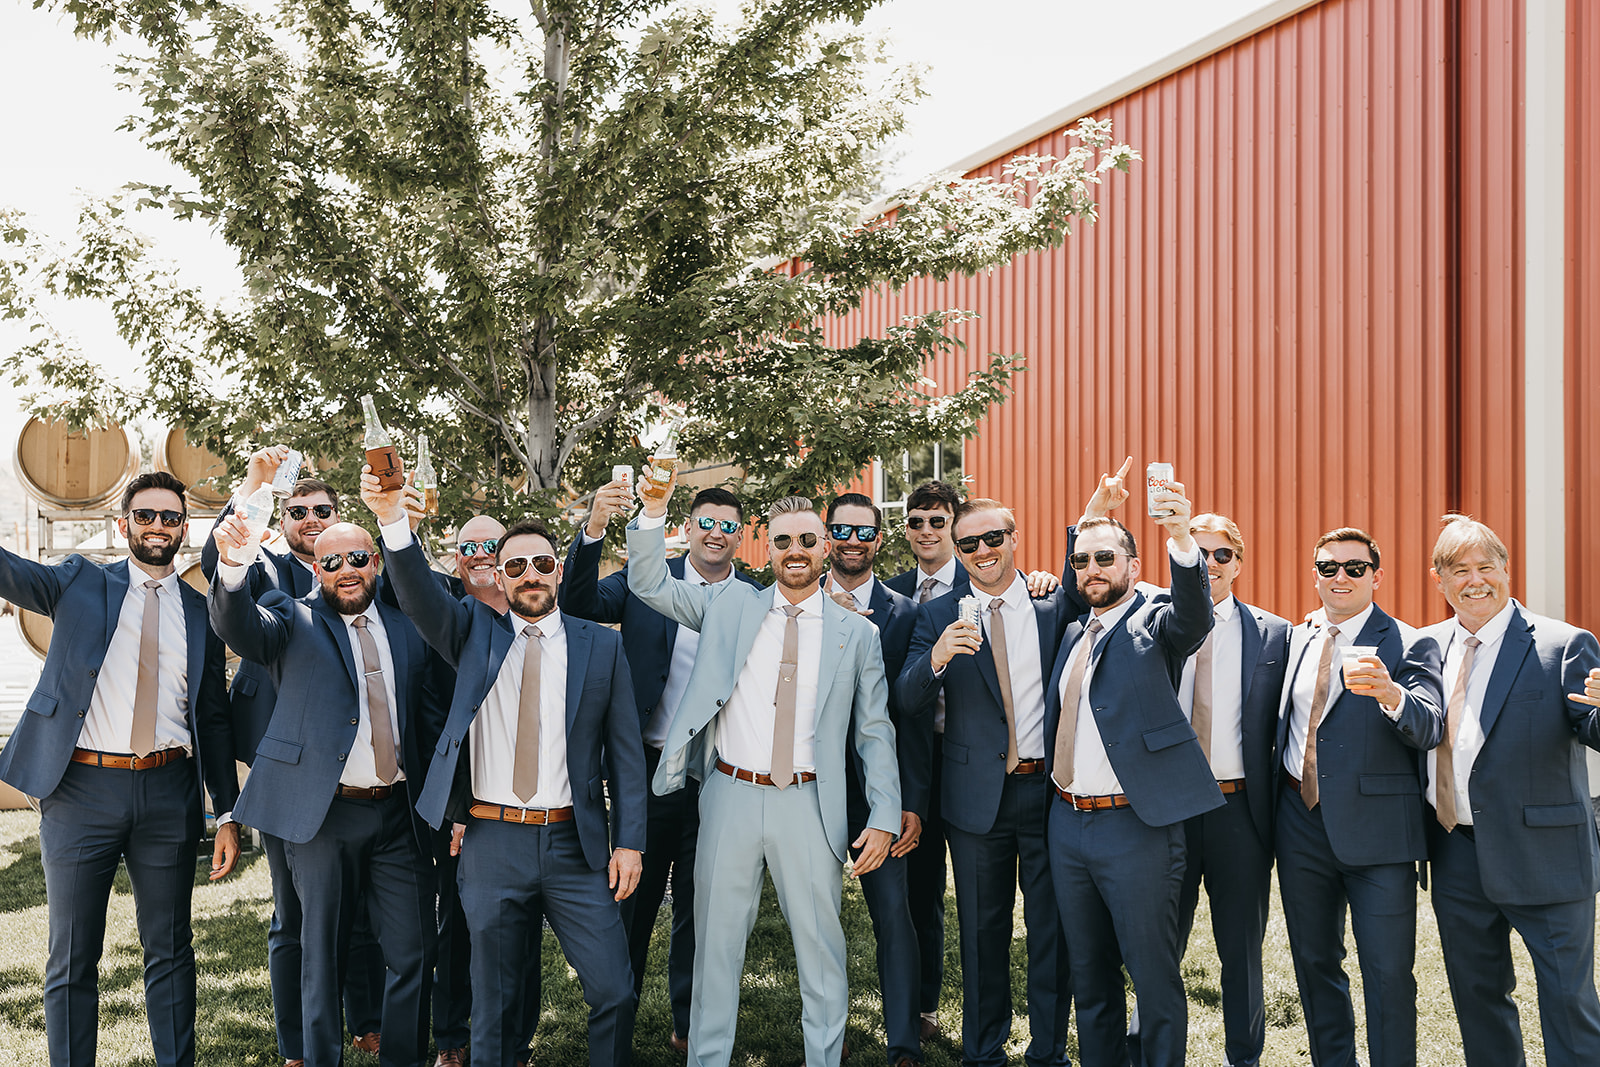 Groom and groomsmen sharing a drink before the wedding  at Copper Wine Company winery